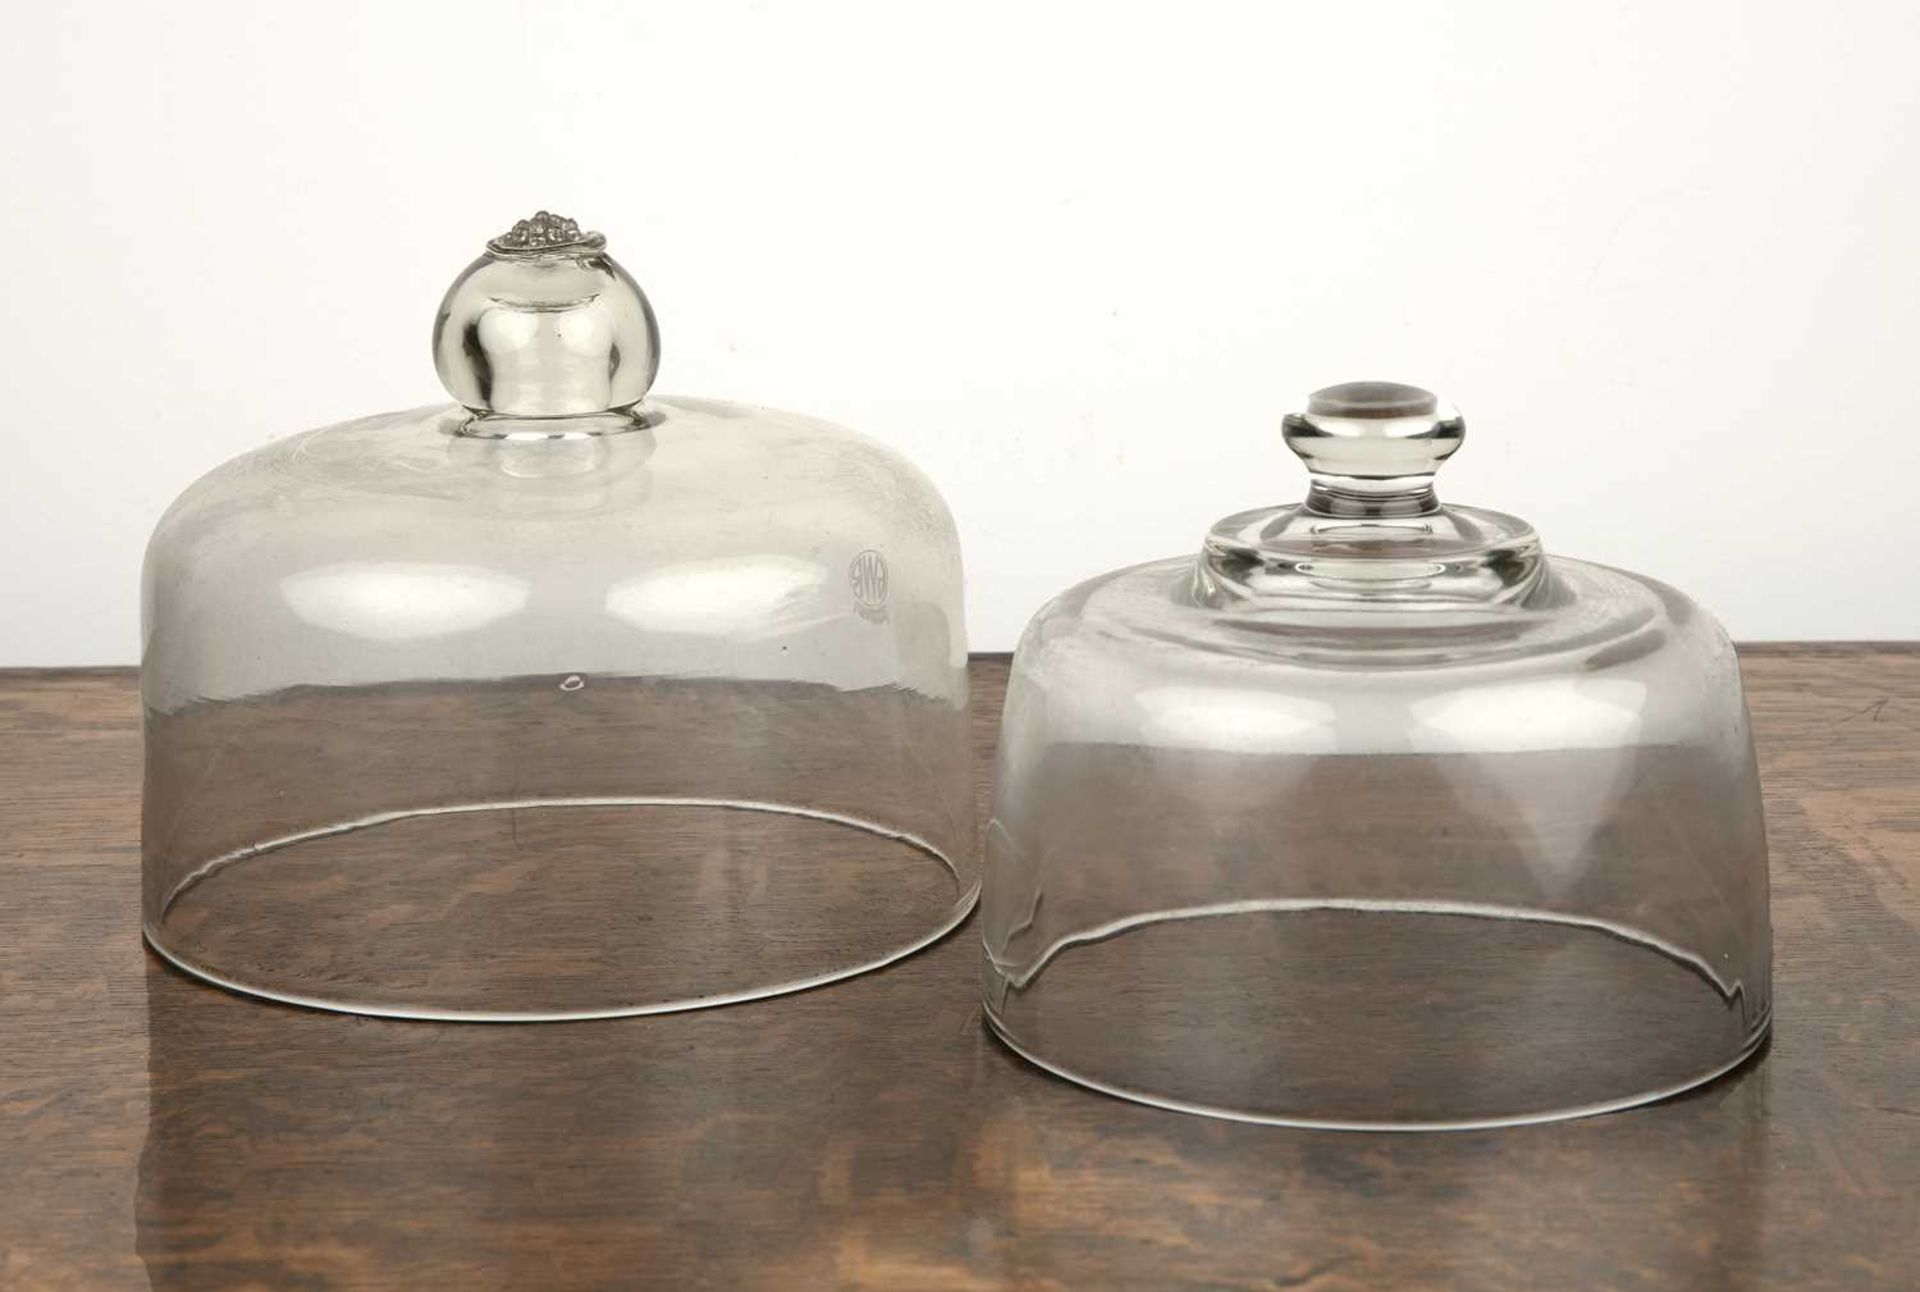 Two GWR glass food covers each with a knop handle, 19.5cm and 16.5cm diameter, the larger dome is